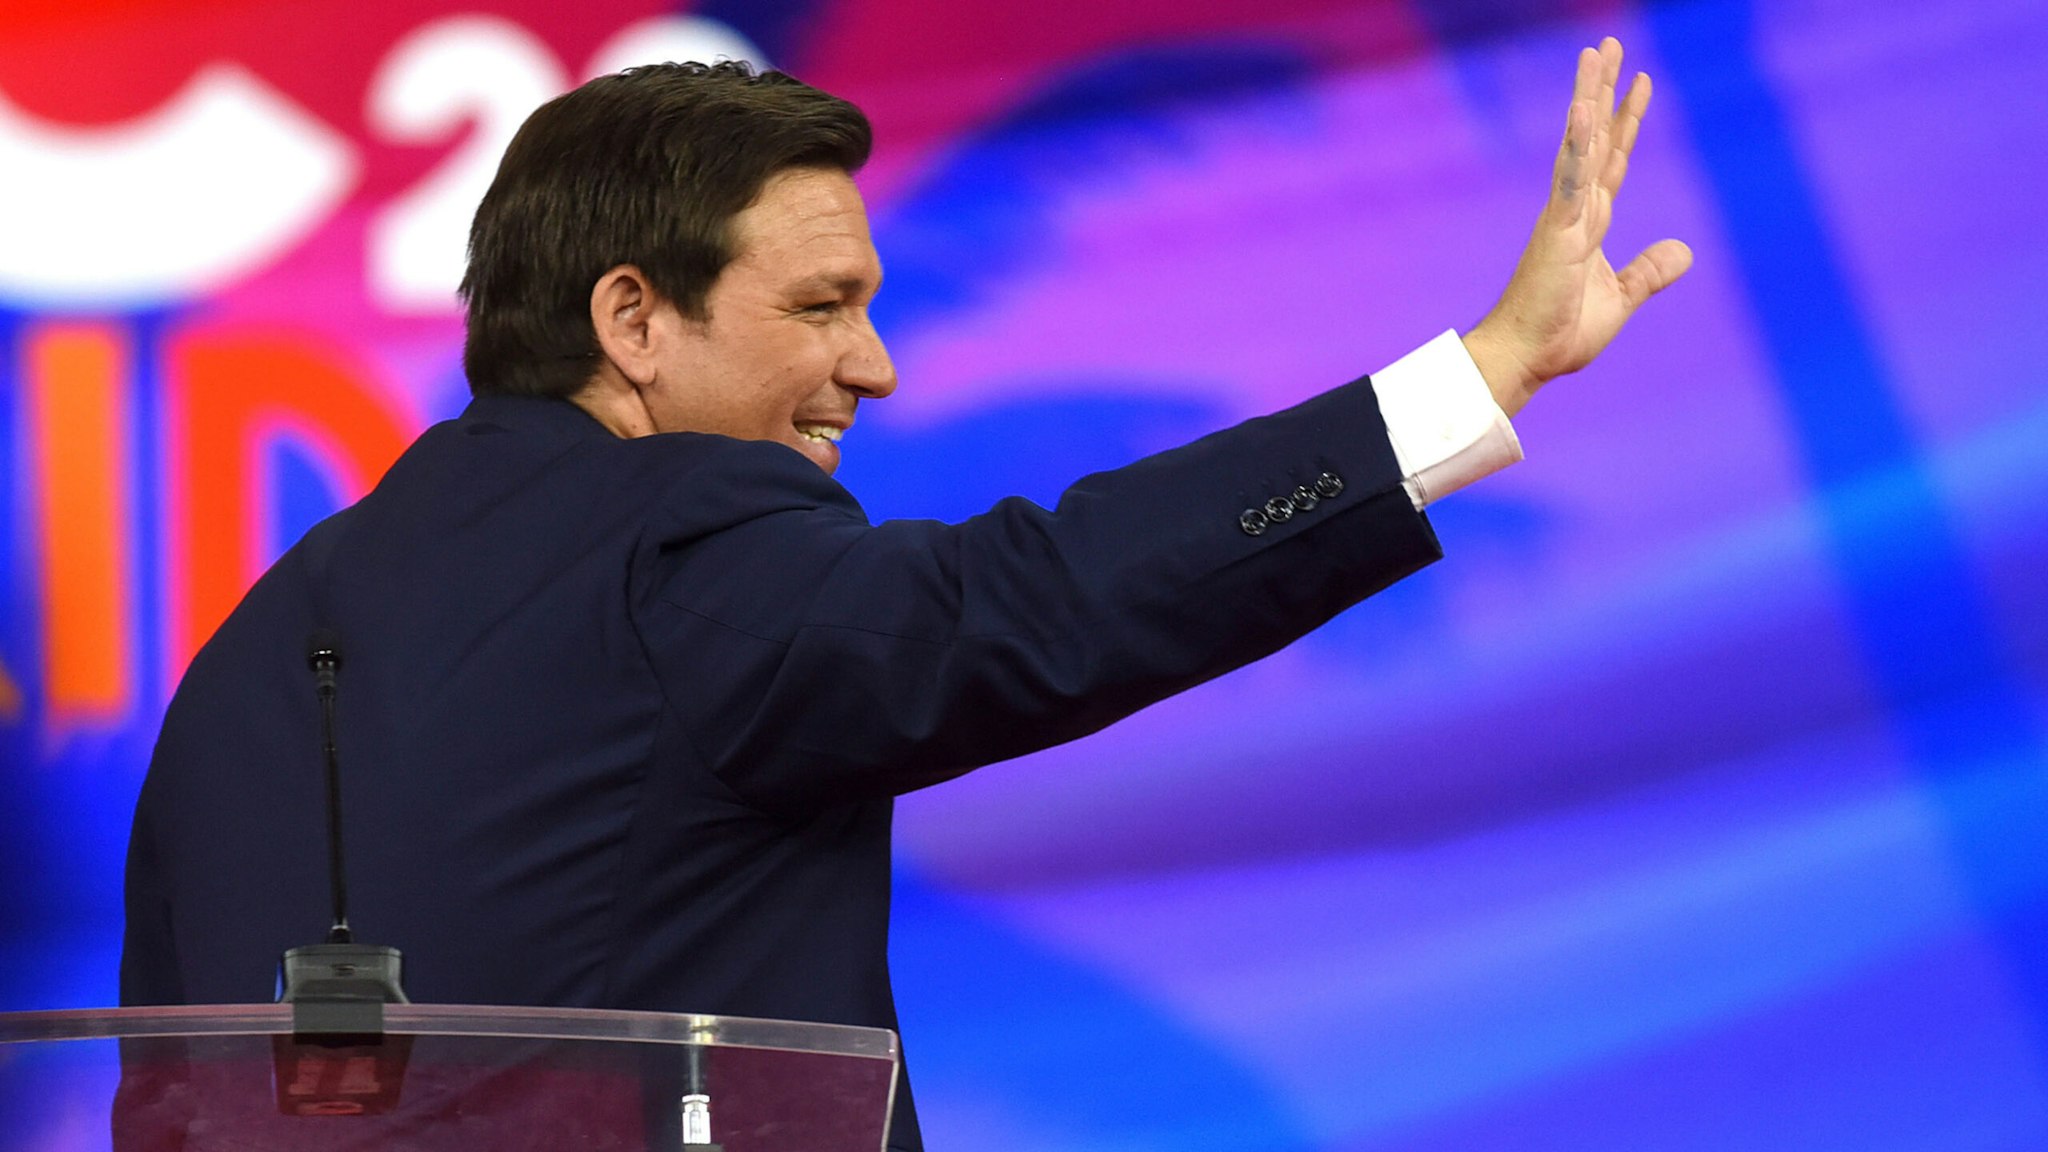 ORLANDO, FLORIDA, UNITED STATES - 2022/02/24: Florida Republican Governor Ron DeSantis waves as he leaves the stage after addressing attendees on day one of the 2022 Conservative Political Action Conference (CPAC) in Orlando. Former U.S. President Donald Trump is also scheduled to speak at the four-day gathering of conservatives